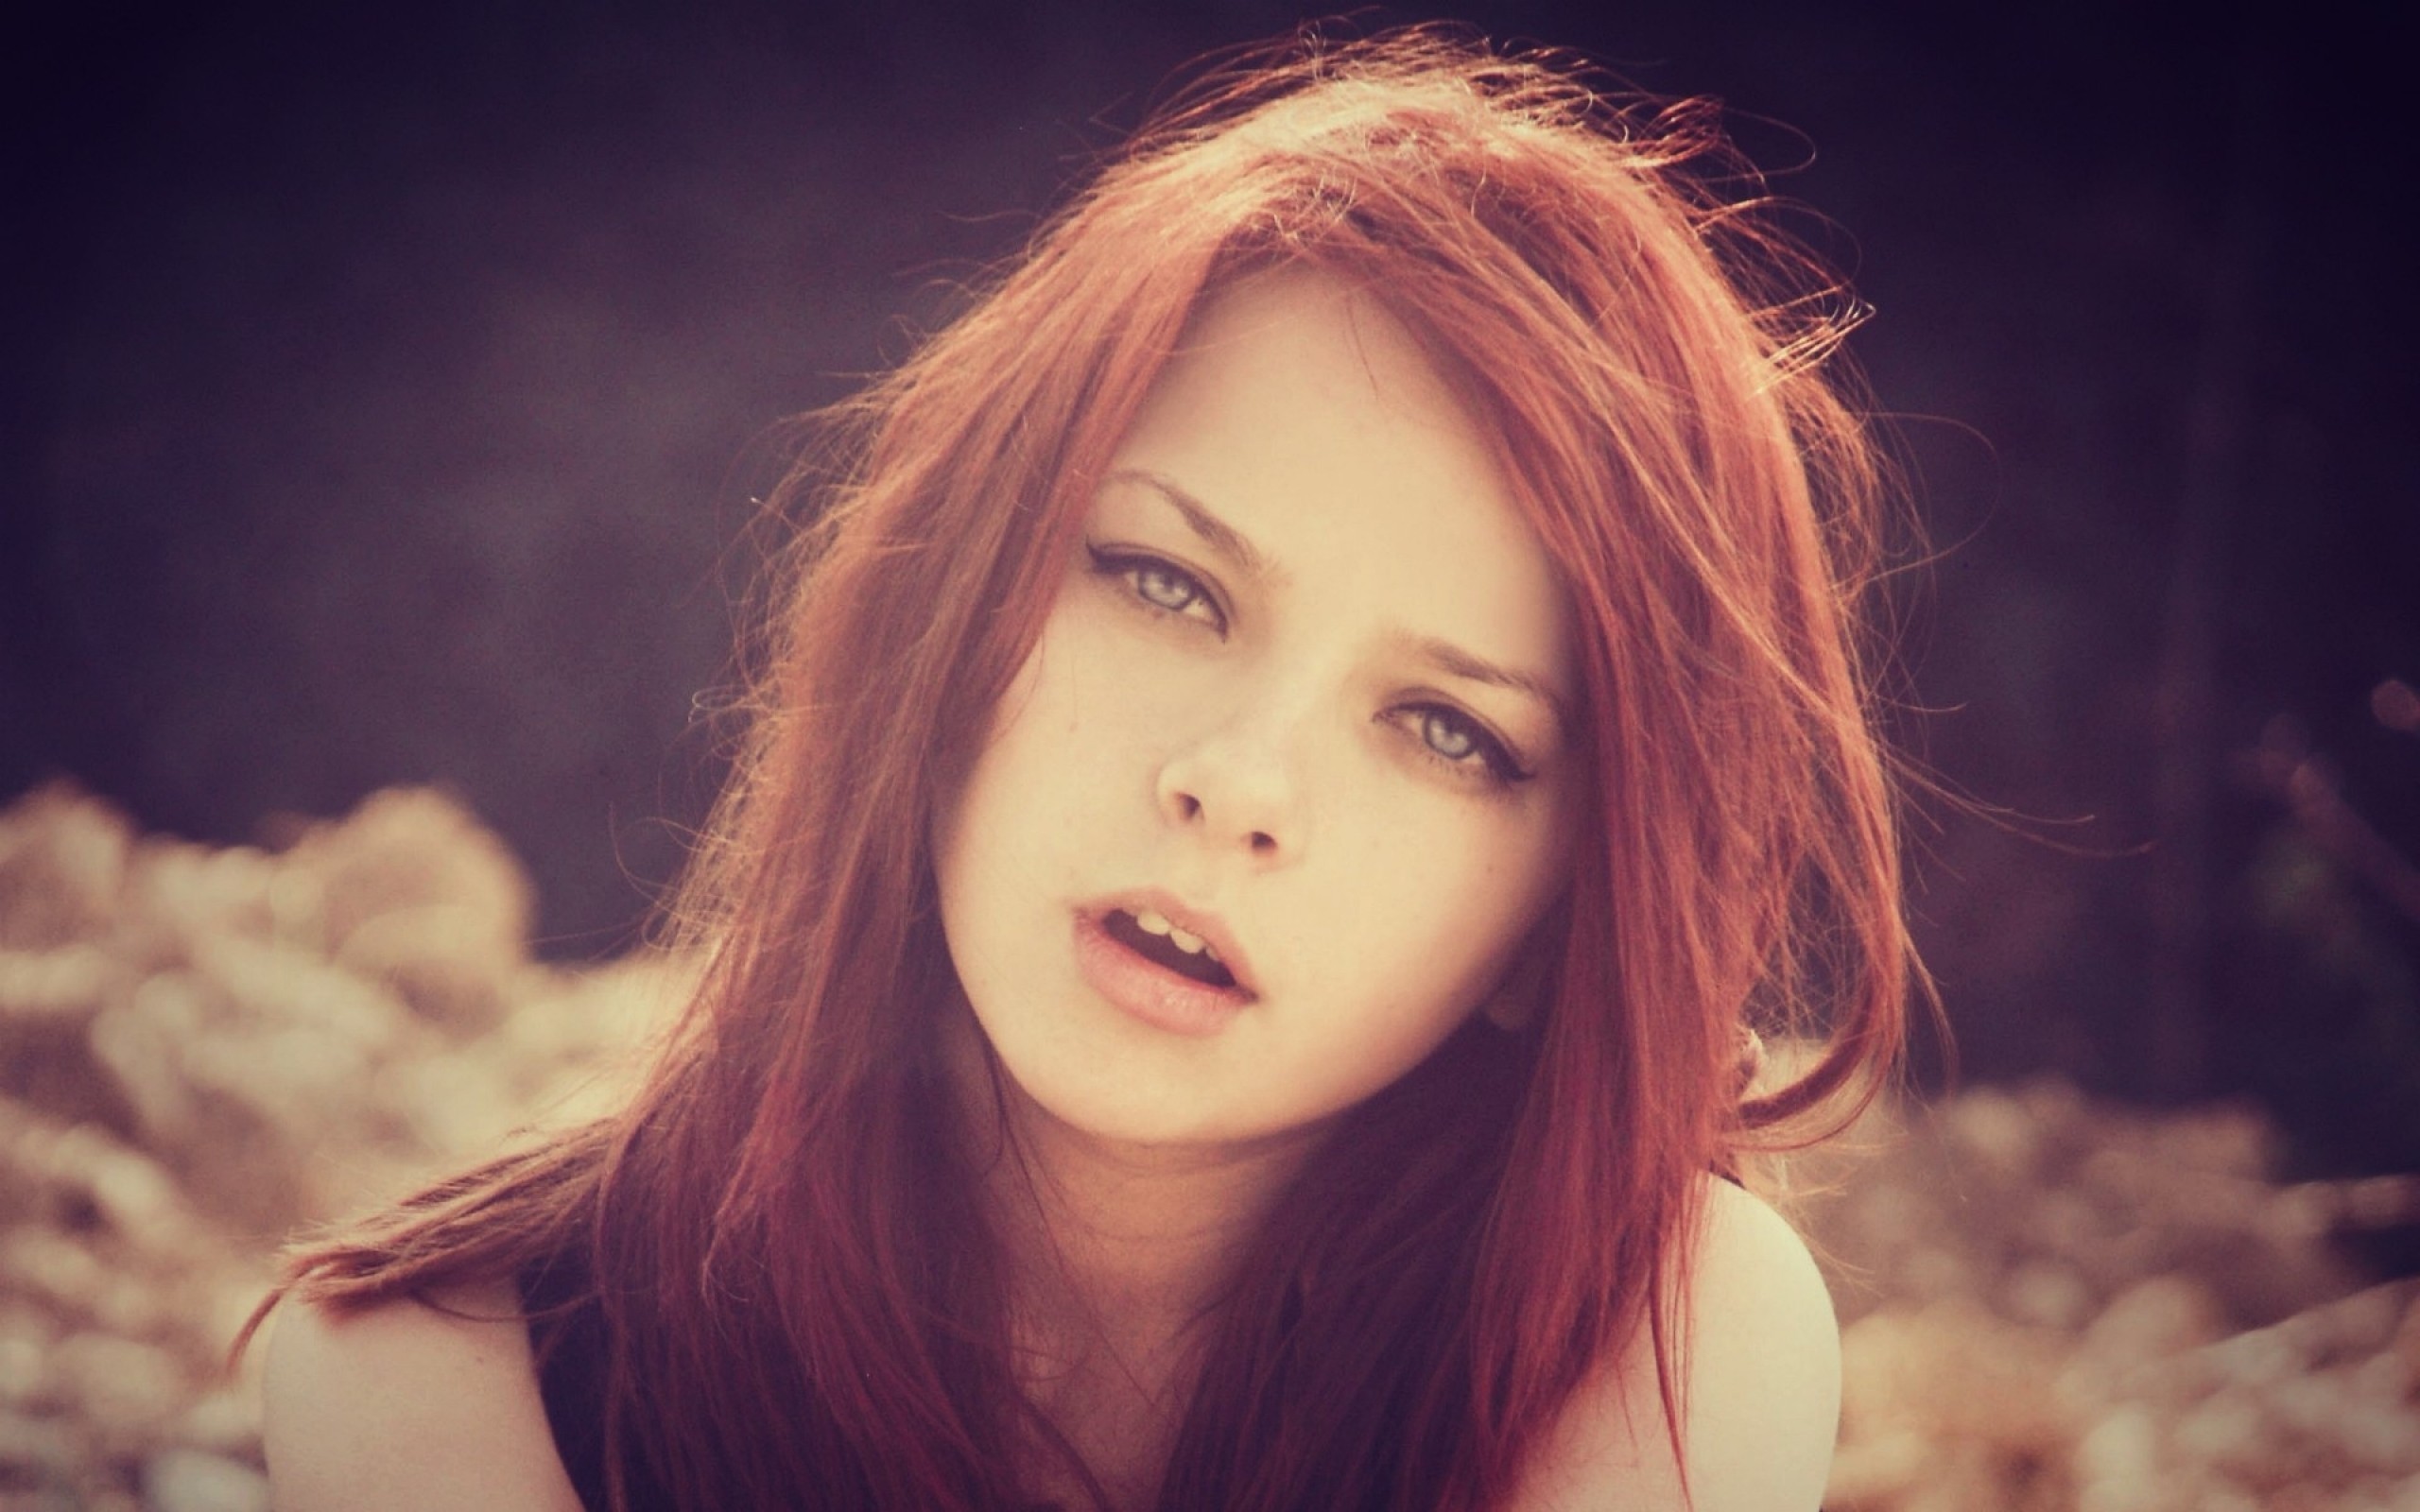 Redhead Model wallpapers and stock photos